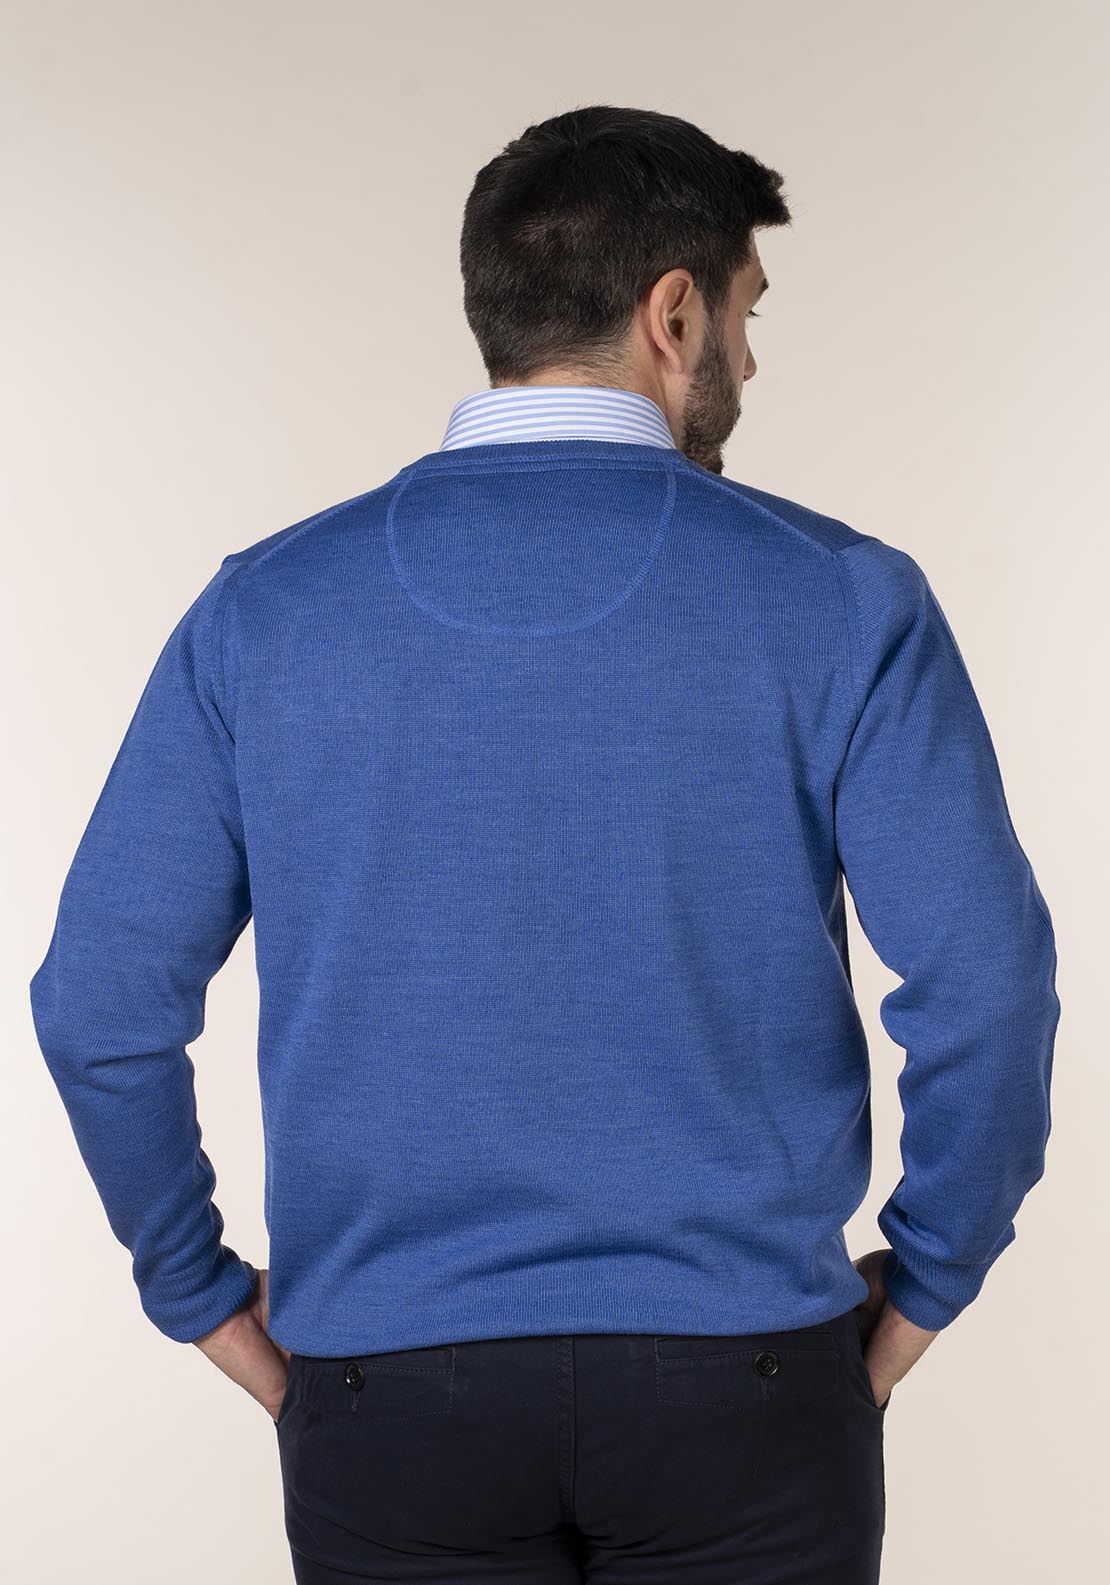 Yeats Mens 100% Cotton V-Neck Jumper 4 Shaws Department Stores